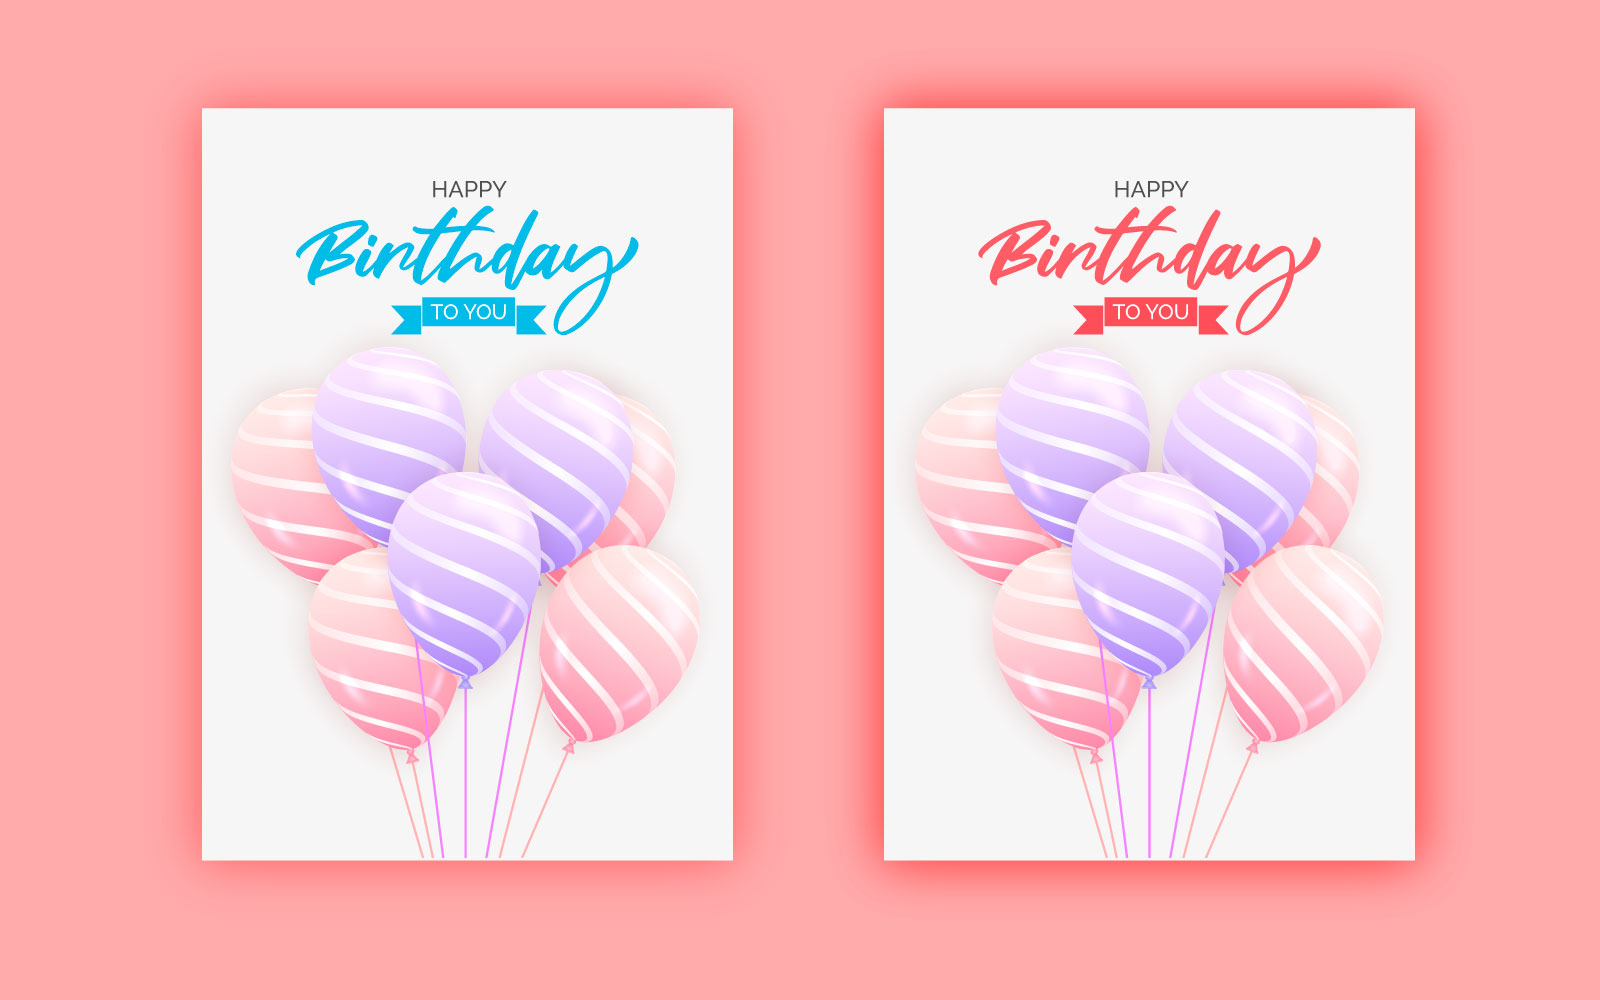 Happy birthday congratulations banner design with  balloons and  for party holiday  cocept